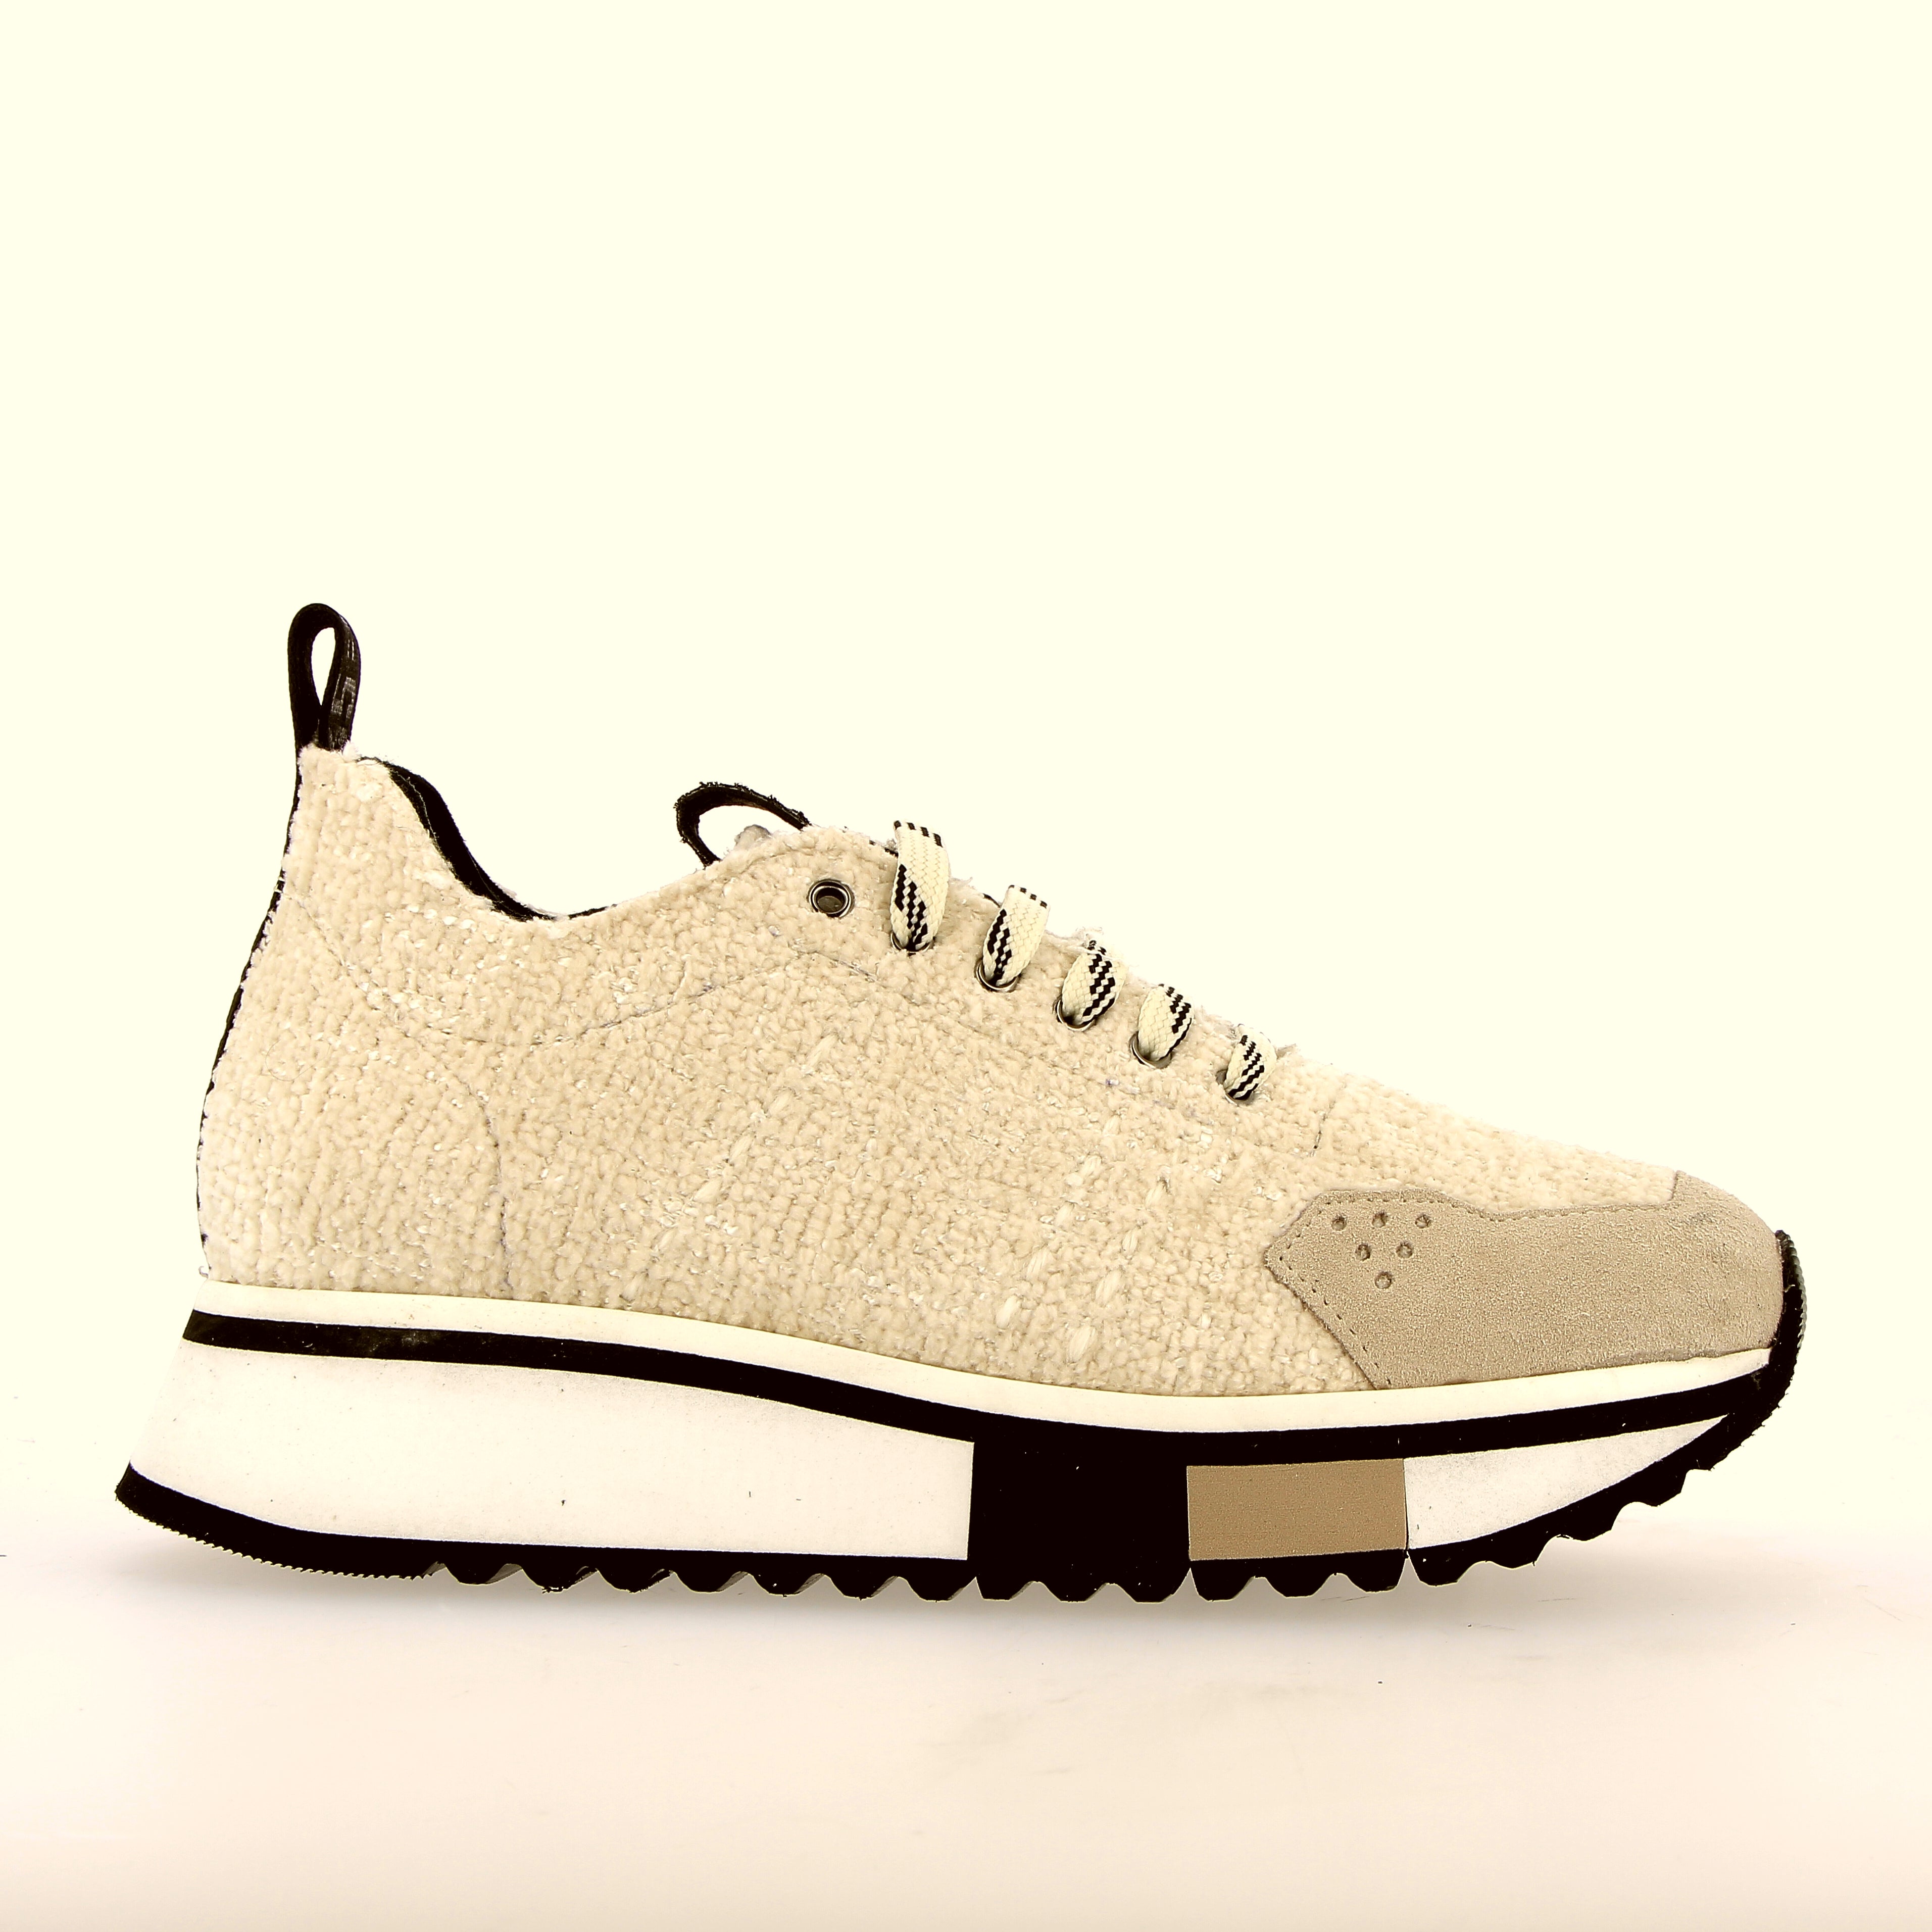 Sneaker in cream velvet with leather inserts